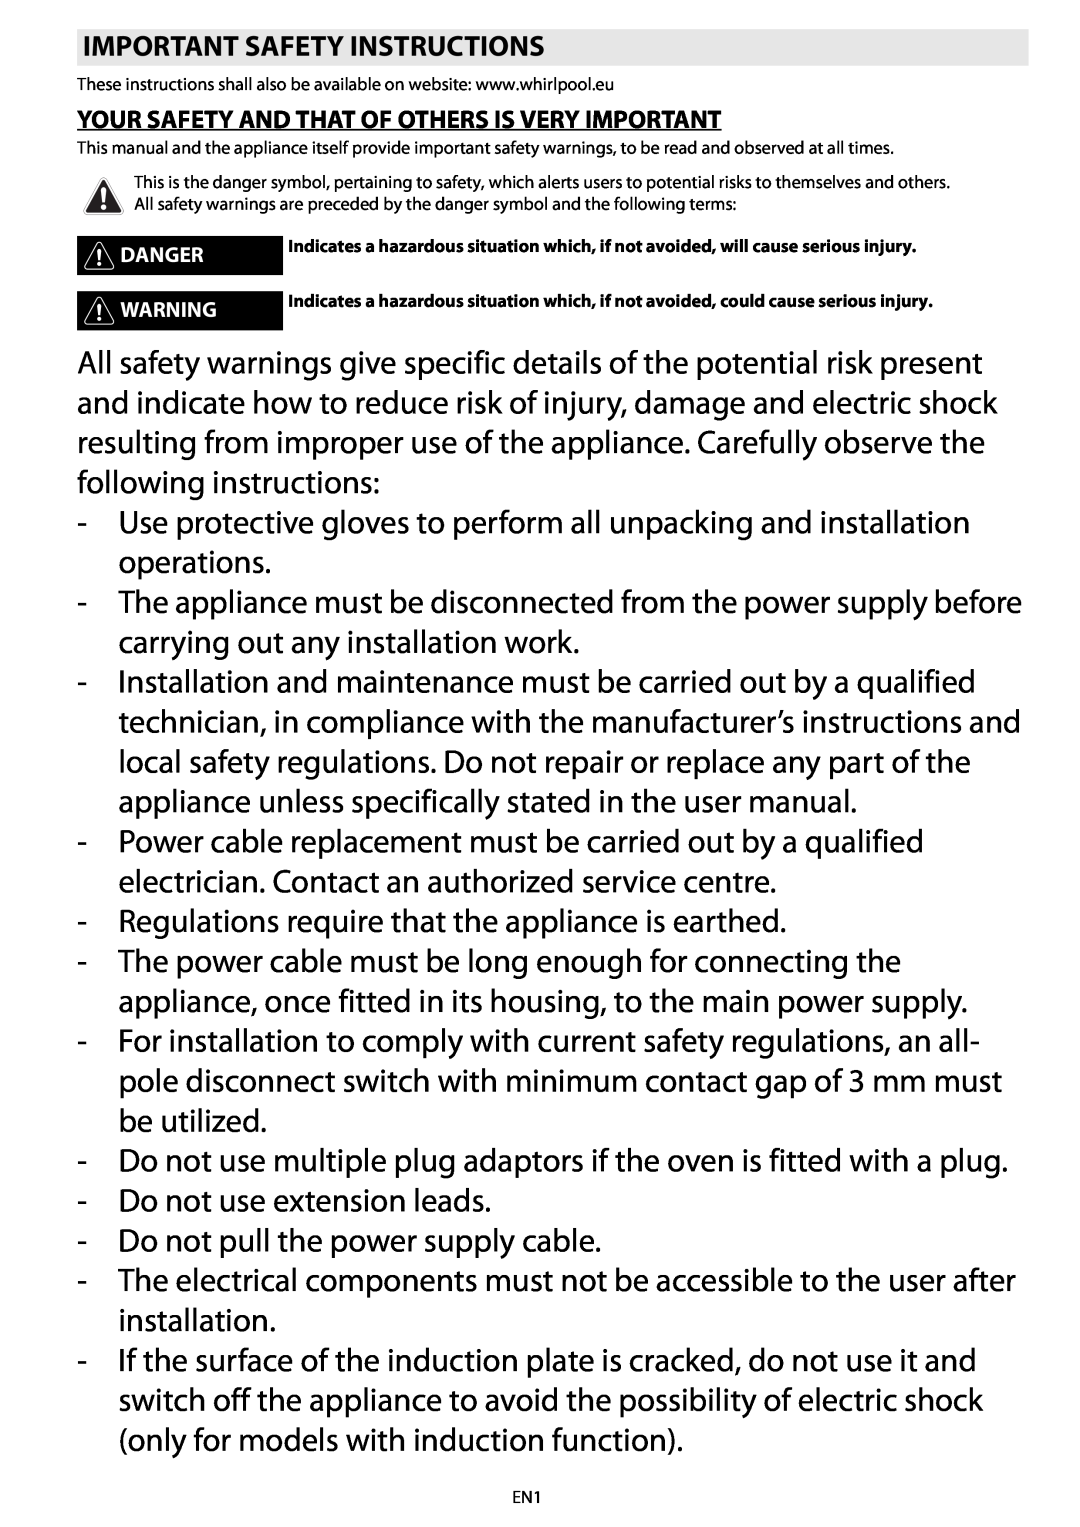 Whirlpool AKZ 562 manual Regulations require that the appliance is earthed 